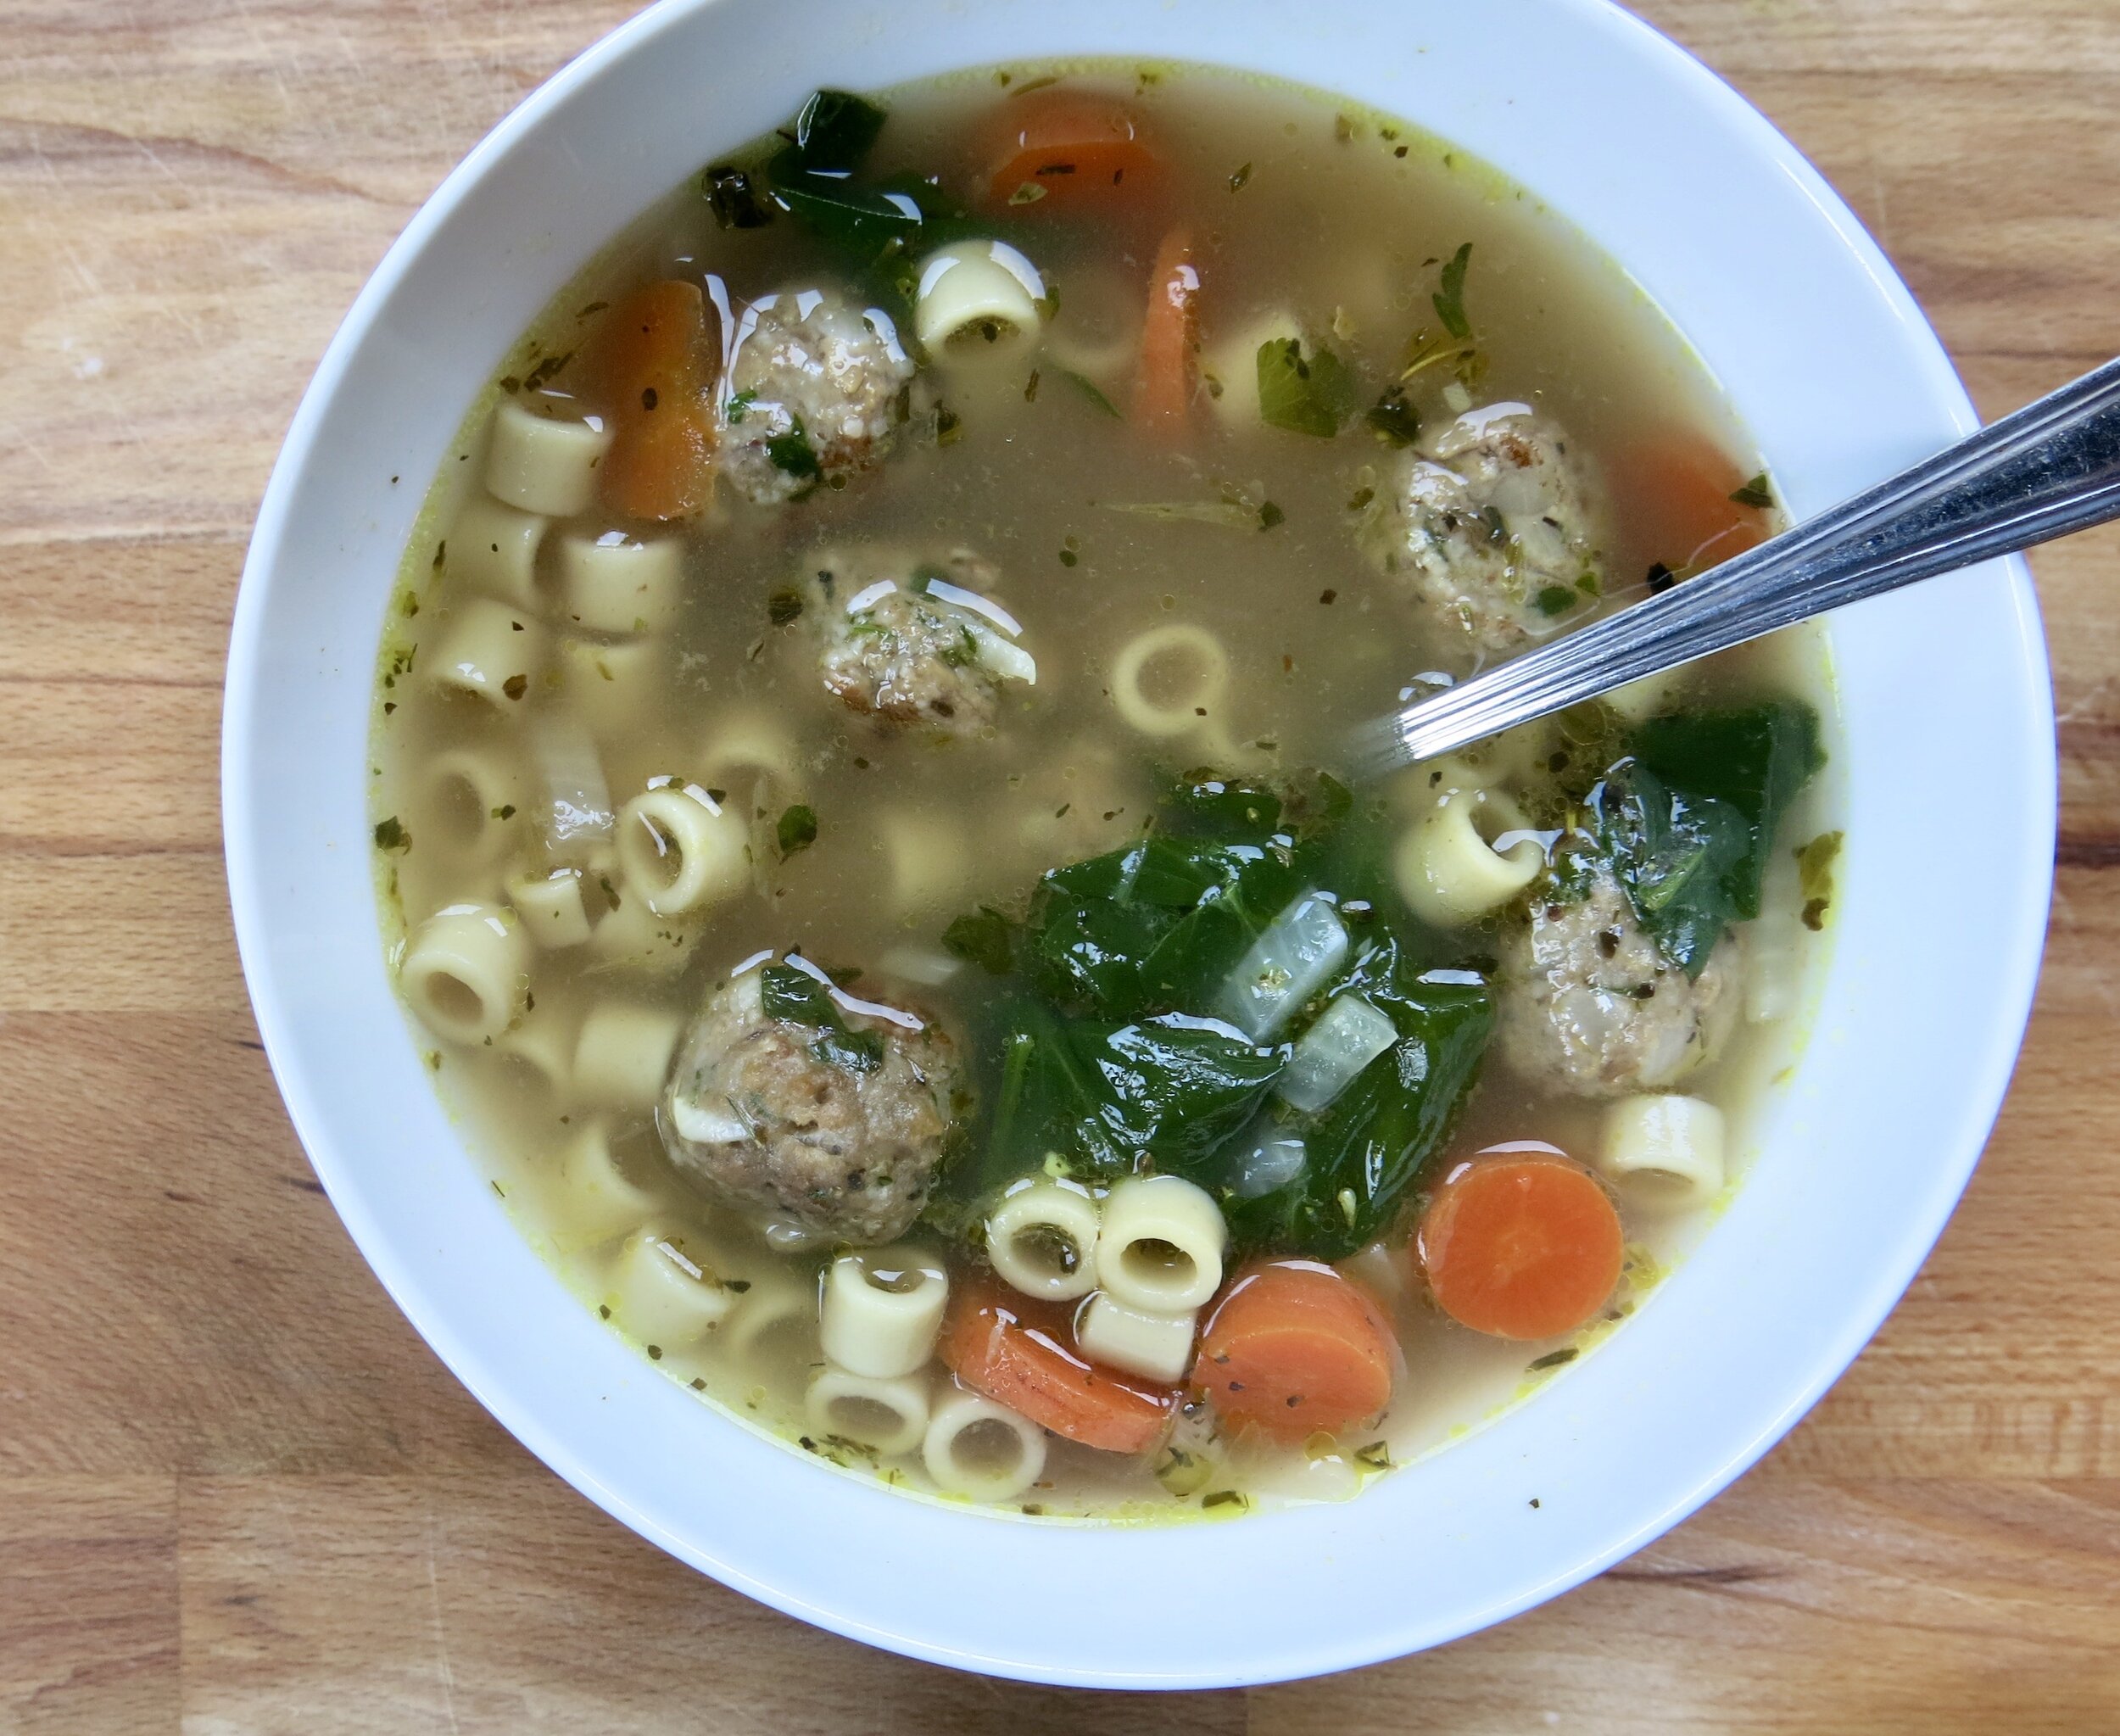 Italian Wedding Soup — Growing From Here